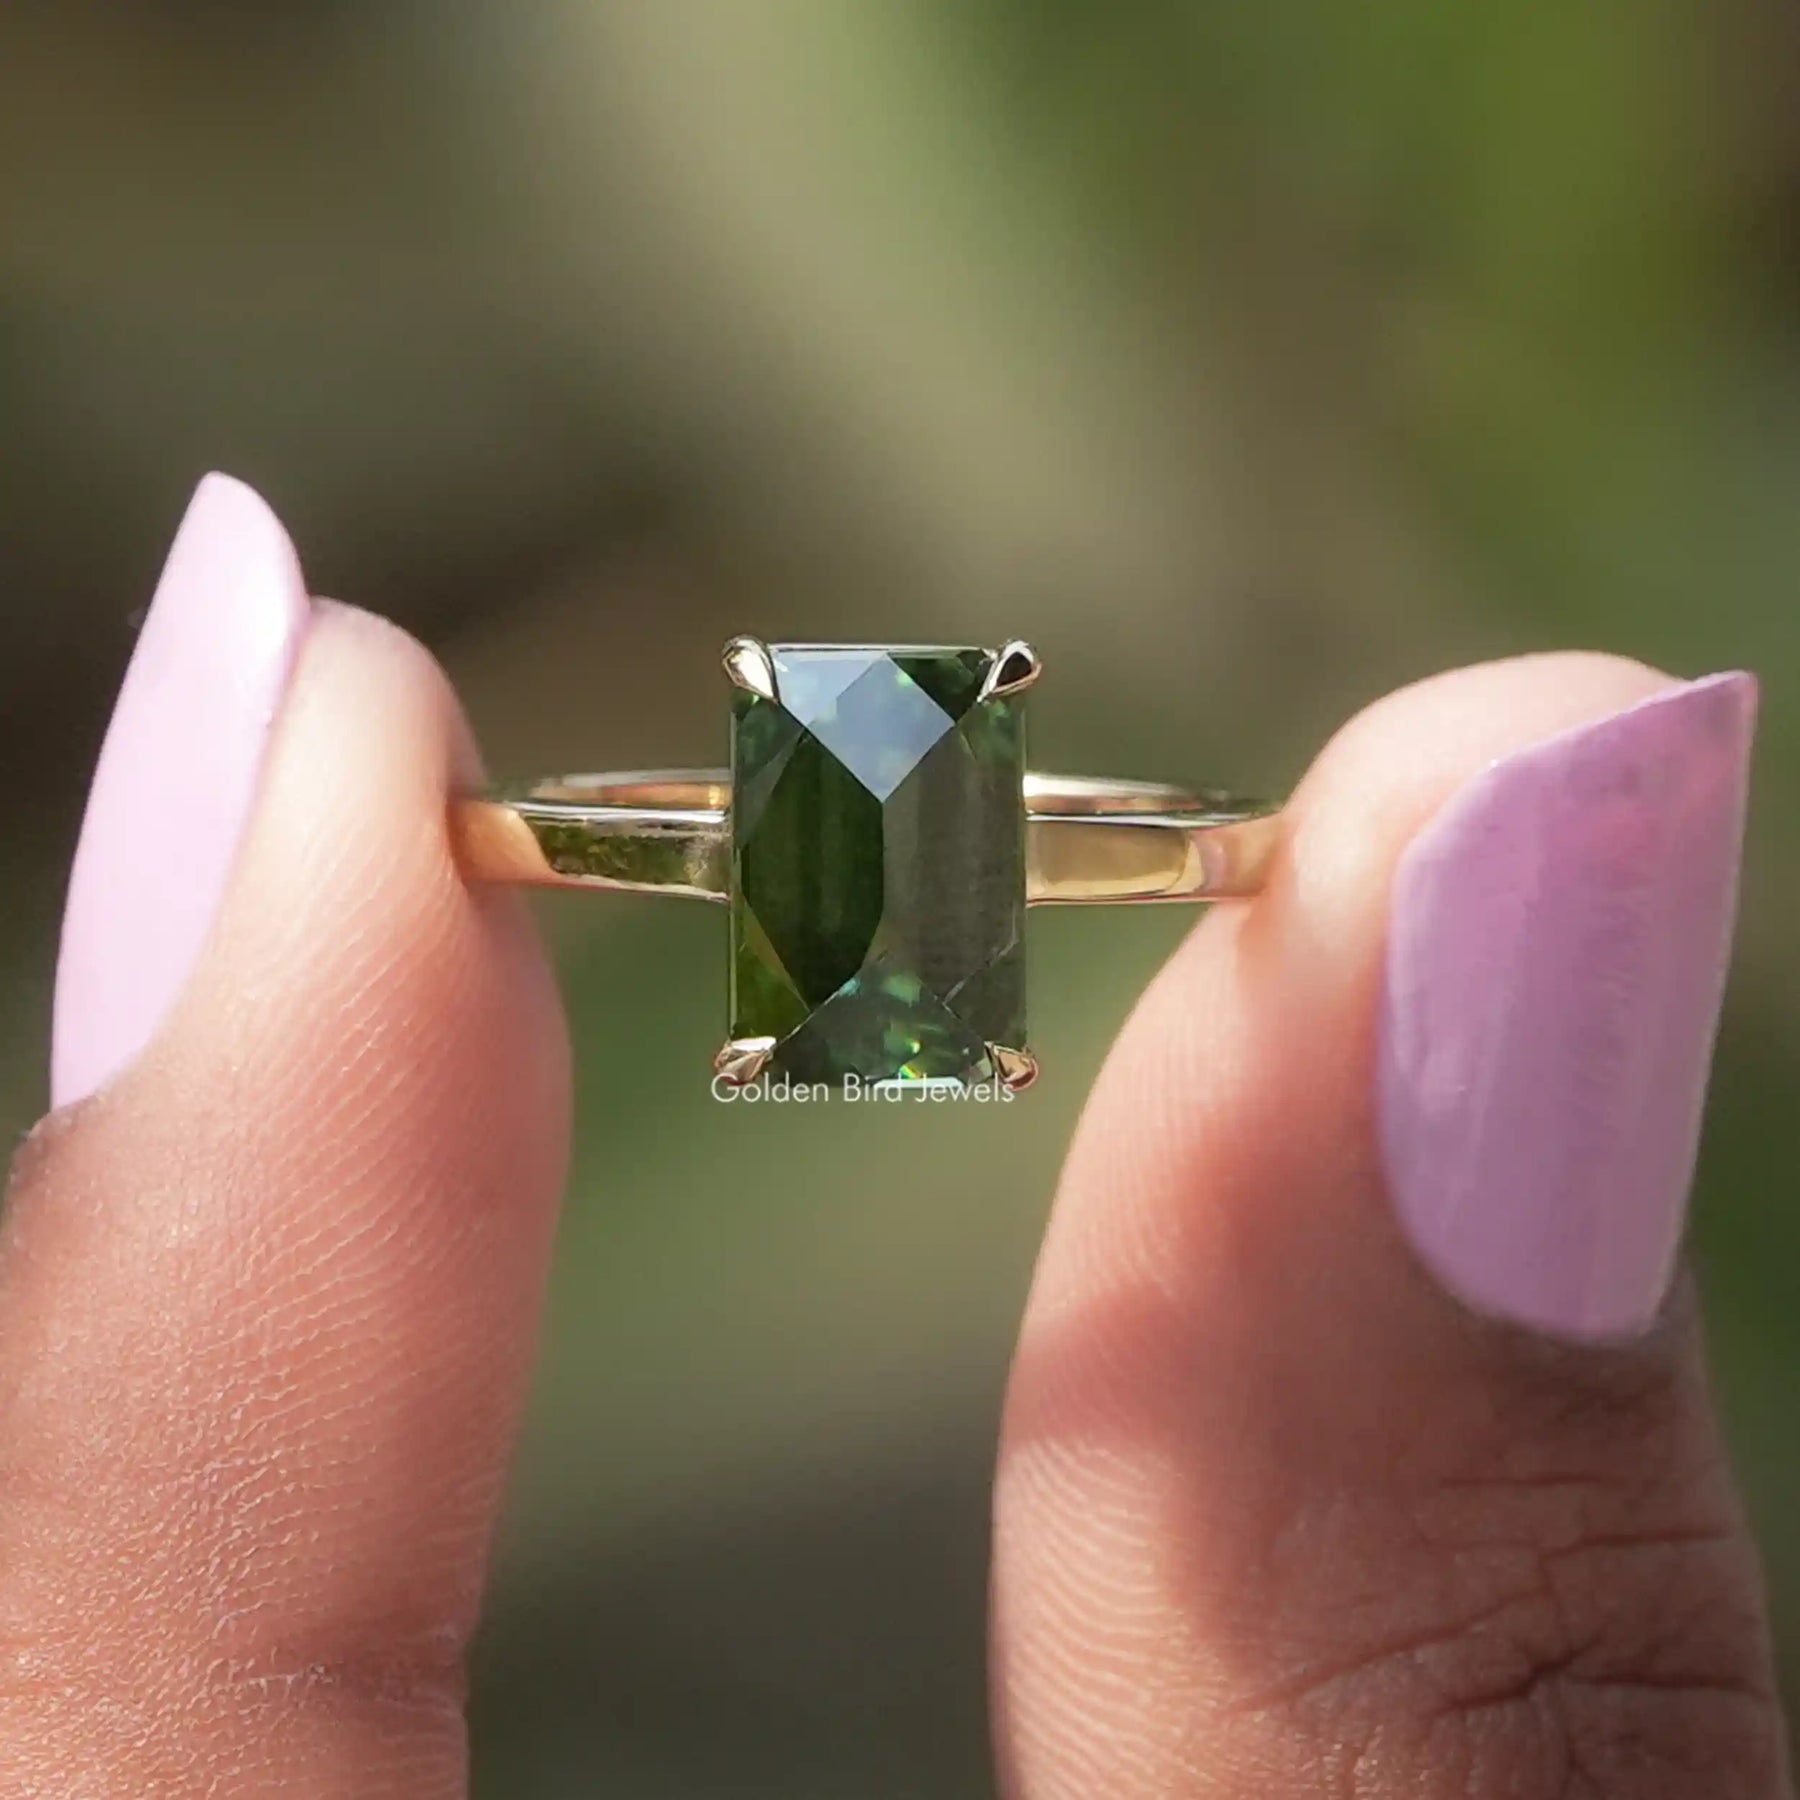 [Front view of green emerald cut solitaire ring]-[Golden Bird Jewels]